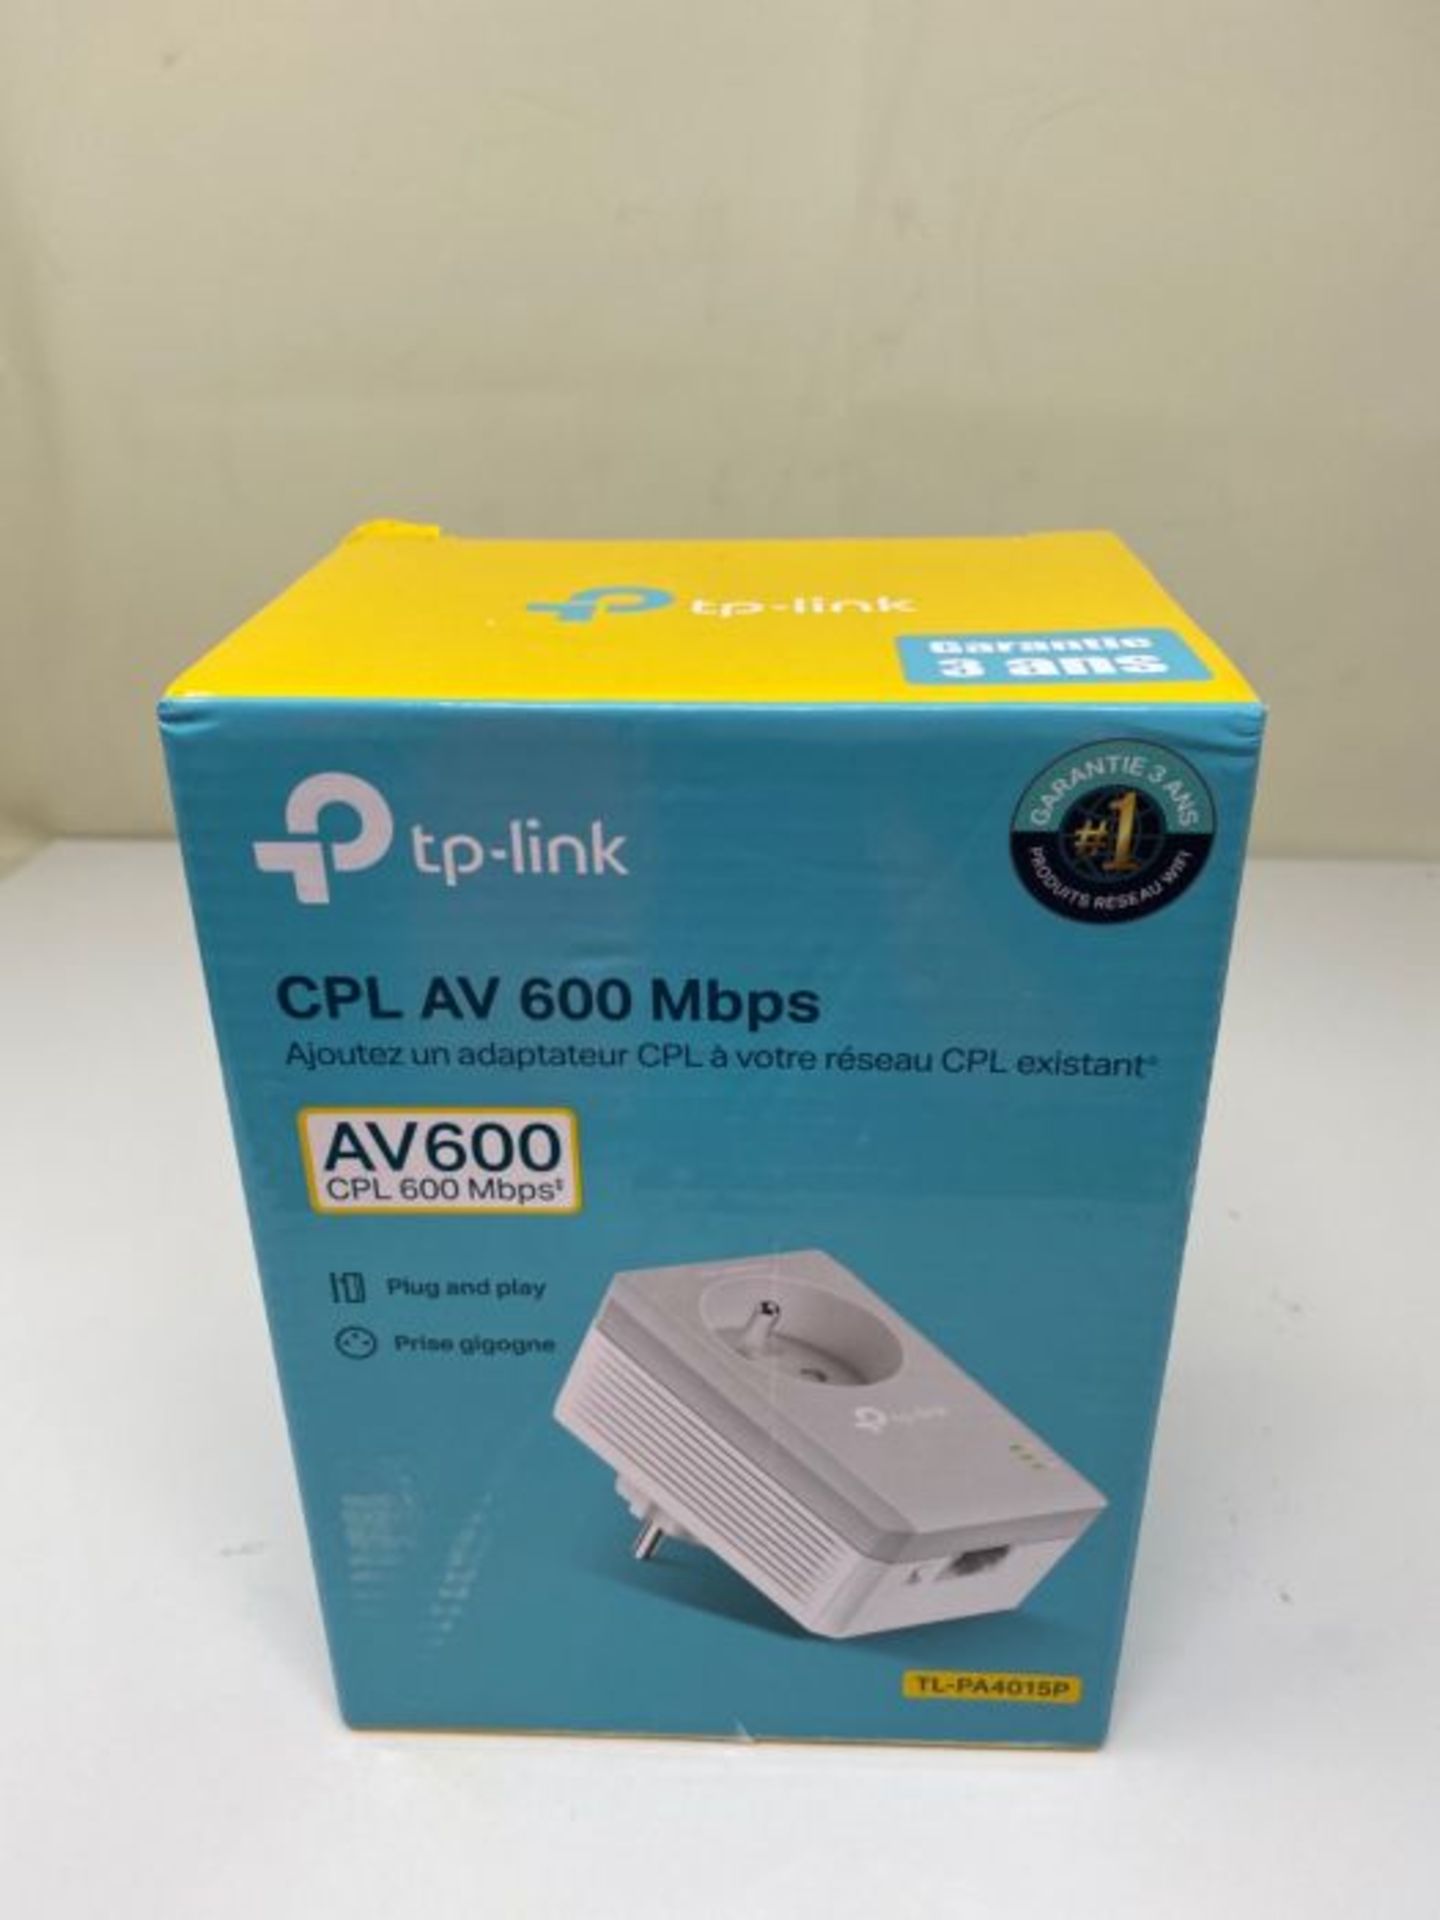 CPL TP-LINK TL-PA4015P - Blanc - Image 2 of 3